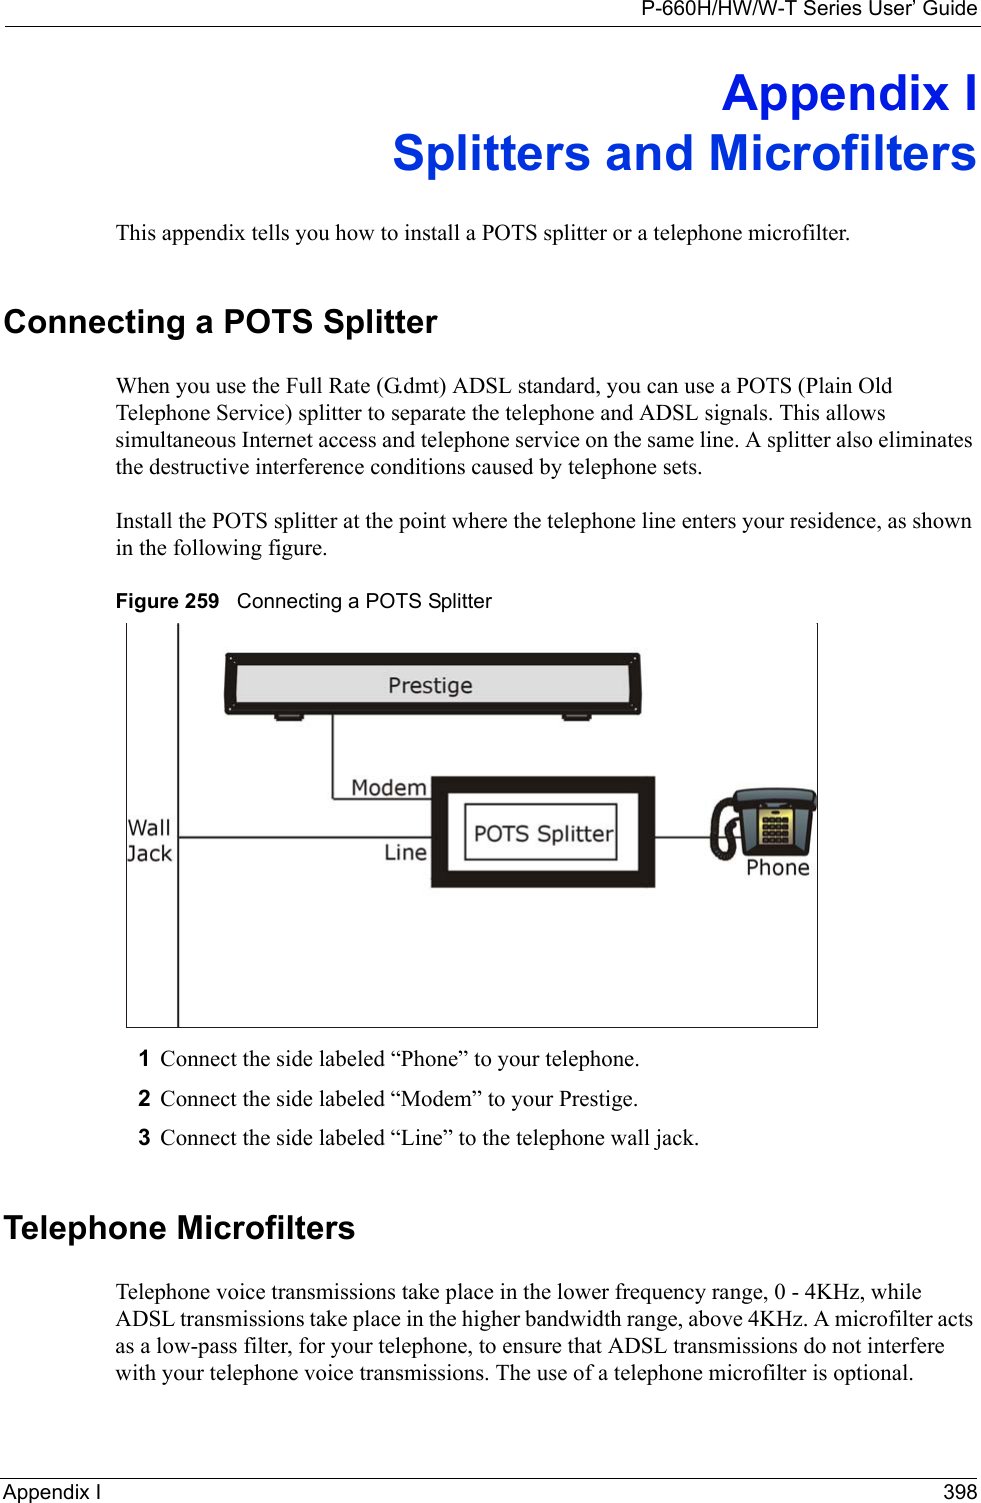 P-660H/HW/W-T Series User’ GuideAppendix I 398Appendix ISplitters and MicrofiltersThis appendix tells you how to install a POTS splitter or a telephone microfilter.Connecting a POTS SplitterWhen you use the Full Rate (G.dmt) ADSL standard, you can use a POTS (Plain Old Telephone Service) splitter to separate the telephone and ADSL signals. This allows simultaneous Internet access and telephone service on the same line. A splitter also eliminates the destructive interference conditions caused by telephone sets. Install the POTS splitter at the point where the telephone line enters your residence, as shown in the following figure.Figure 259   Connecting a POTS Splitter1Connect the side labeled “Phone” to your telephone.2Connect the side labeled “Modem” to your Prestige.3Connect the side labeled “Line” to the telephone wall jack.Telephone MicrofiltersTelephone voice transmissions take place in the lower frequency range, 0 - 4KHz, while ADSL transmissions take place in the higher bandwidth range, above 4KHz. A microfilter acts as a low-pass filter, for your telephone, to ensure that ADSL transmissions do not interfere with your telephone voice transmissions. The use of a telephone microfilter is optional. 